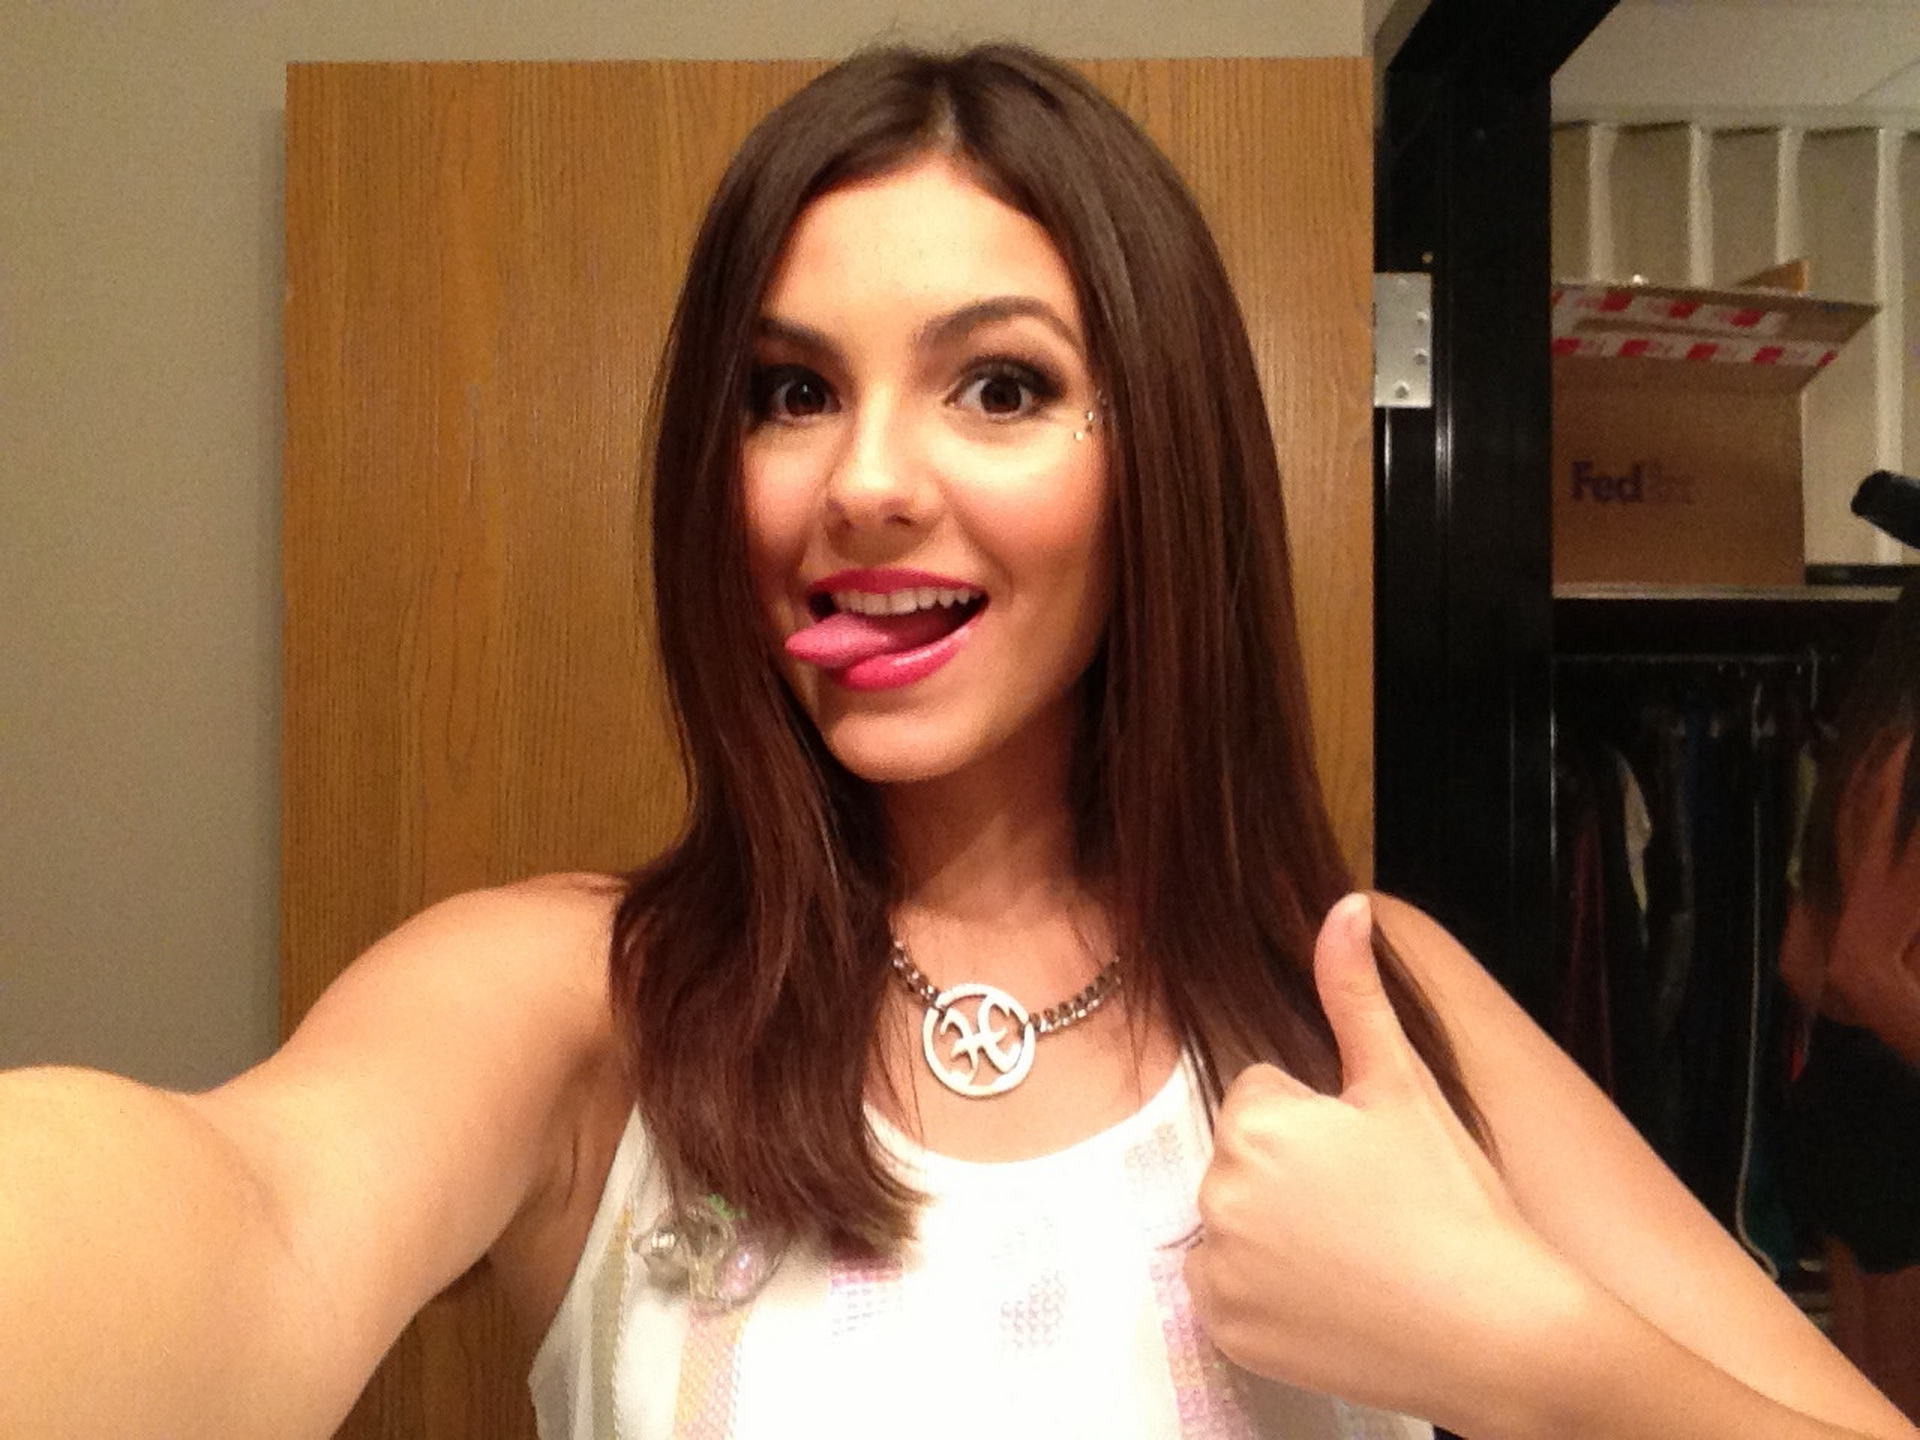 Victoria_Justice_leaked_private_nude_photo_hacked_personal_naked_pics_36x_MixQ_34.jpg